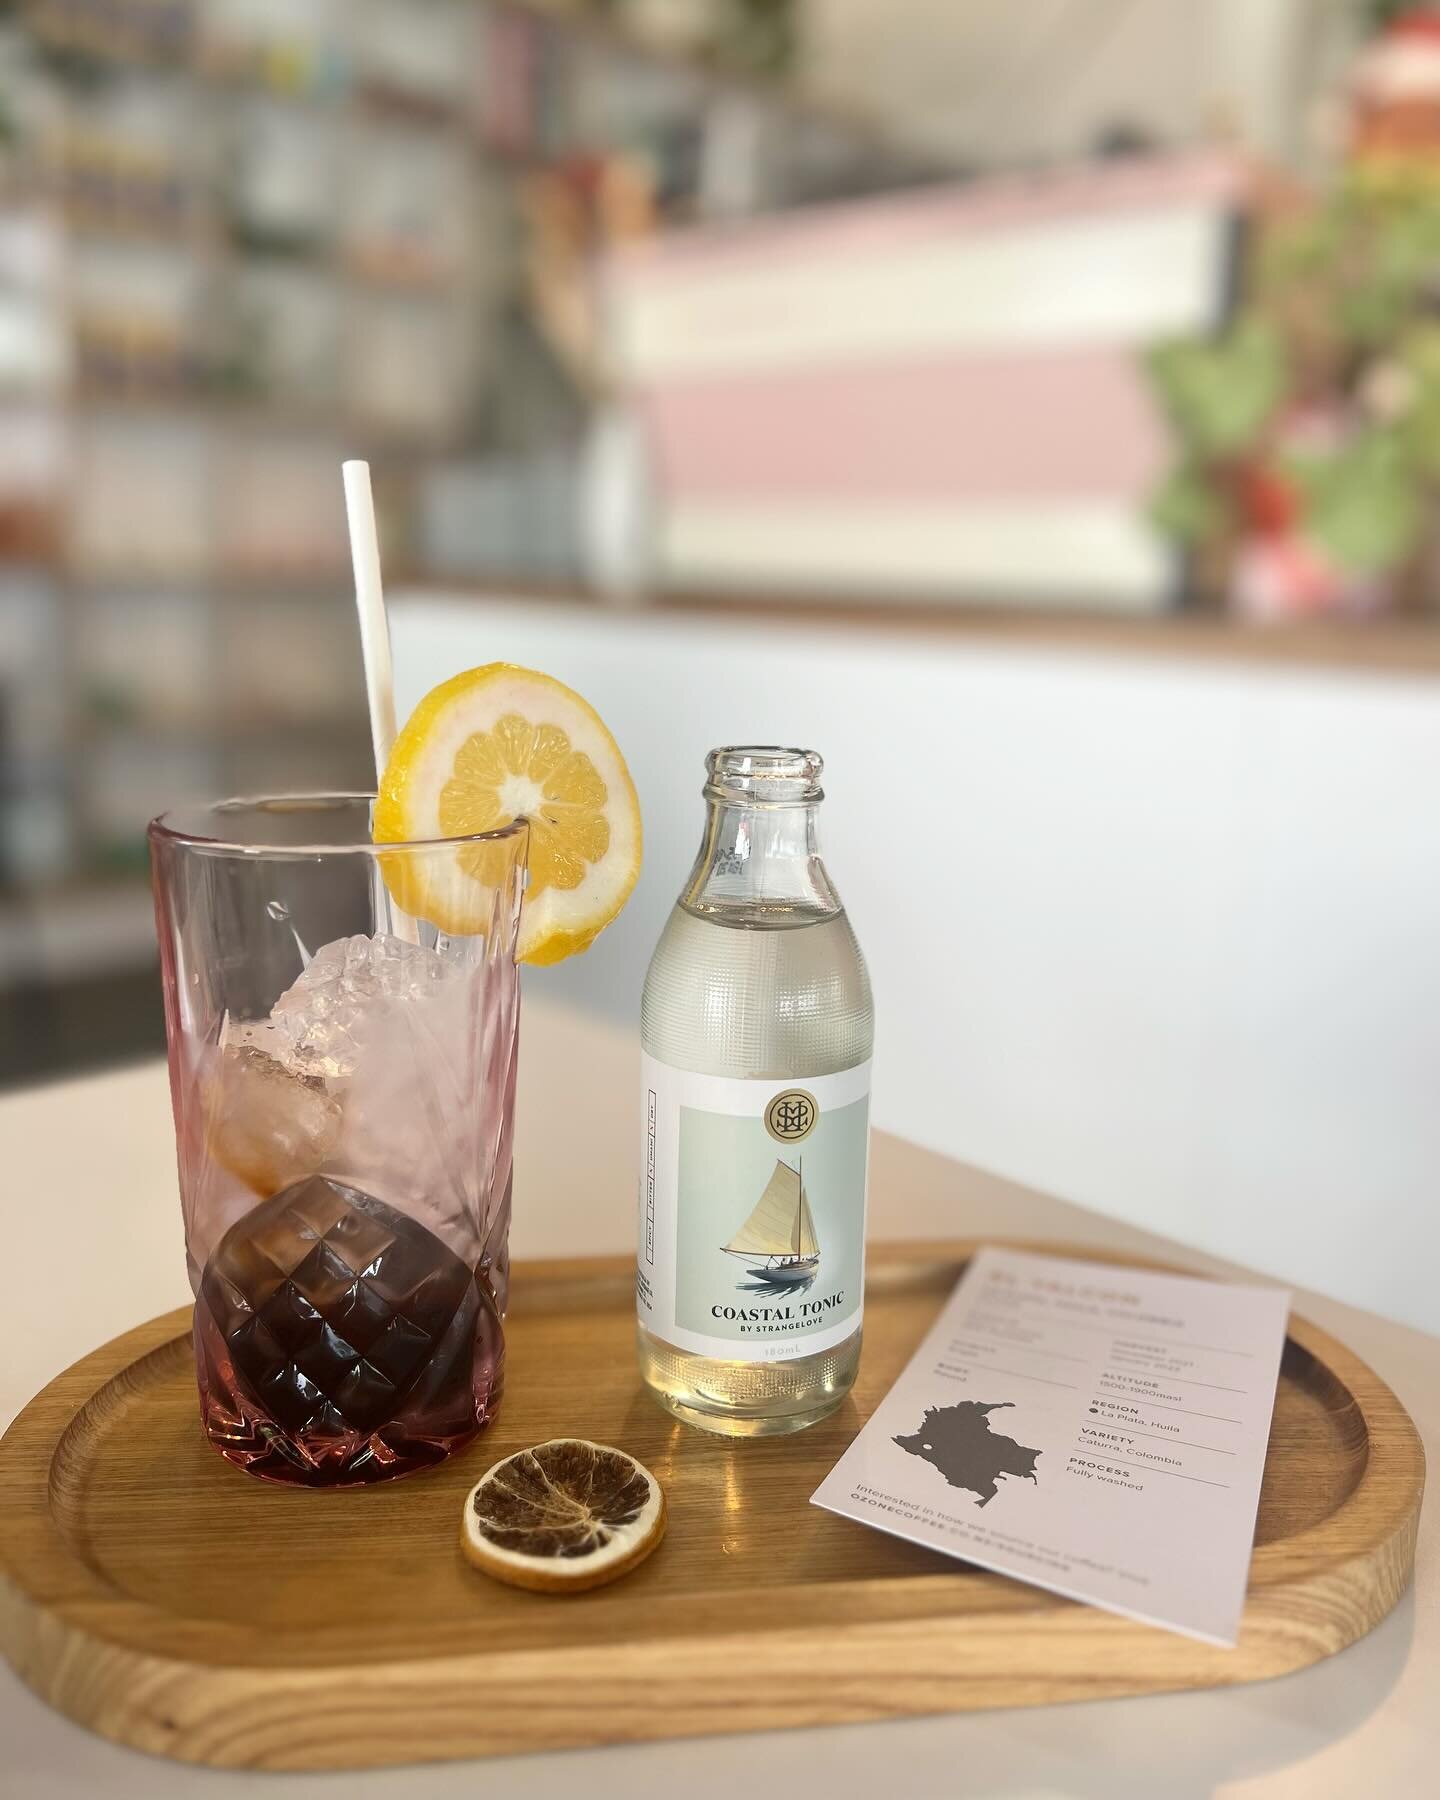 Sneak peak at our &lsquo;Summer coffee menu&rsquo;. 
This is our Cold Brew &amp; Tonic, perfect for those summery days. 🌞 ☕️ 
El Yalcon Colombian cold brew by @ozonecoffeenz served over ice, with StrangeLove Coastal tonic finished with a freeze drie